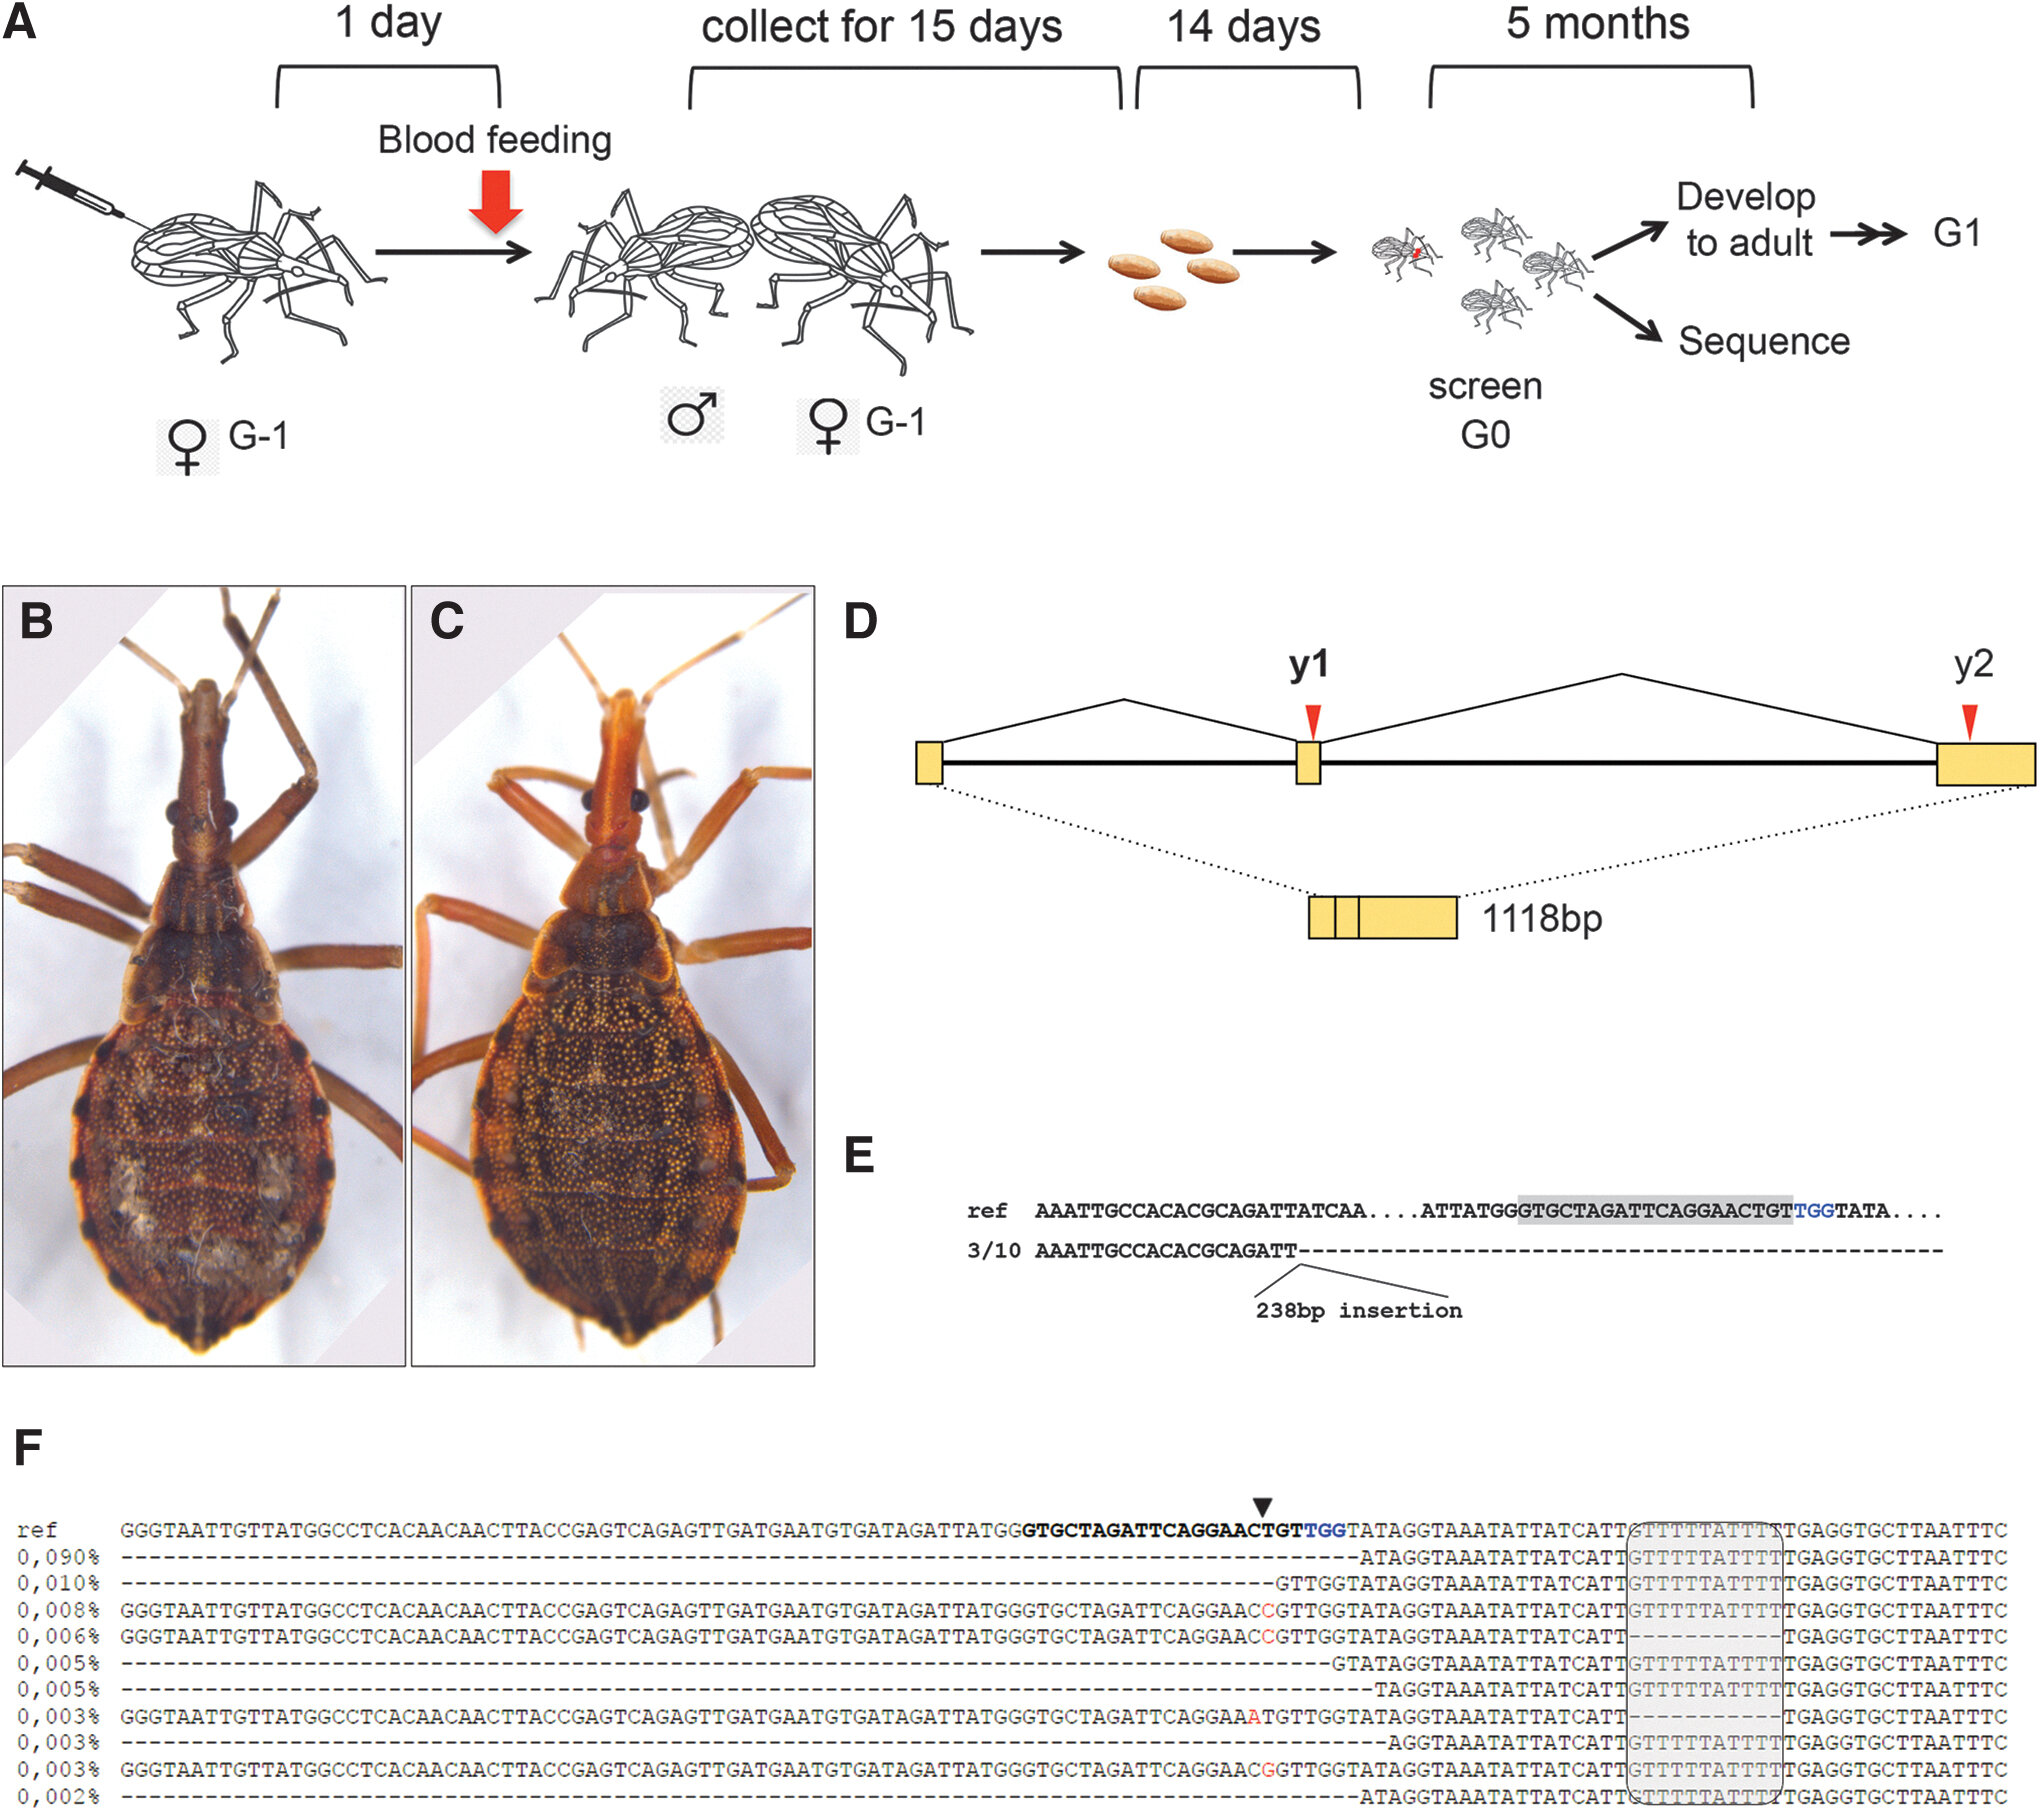 photo of Kissing bugs, vector for Chagas disease, successfully gene edited for first time image